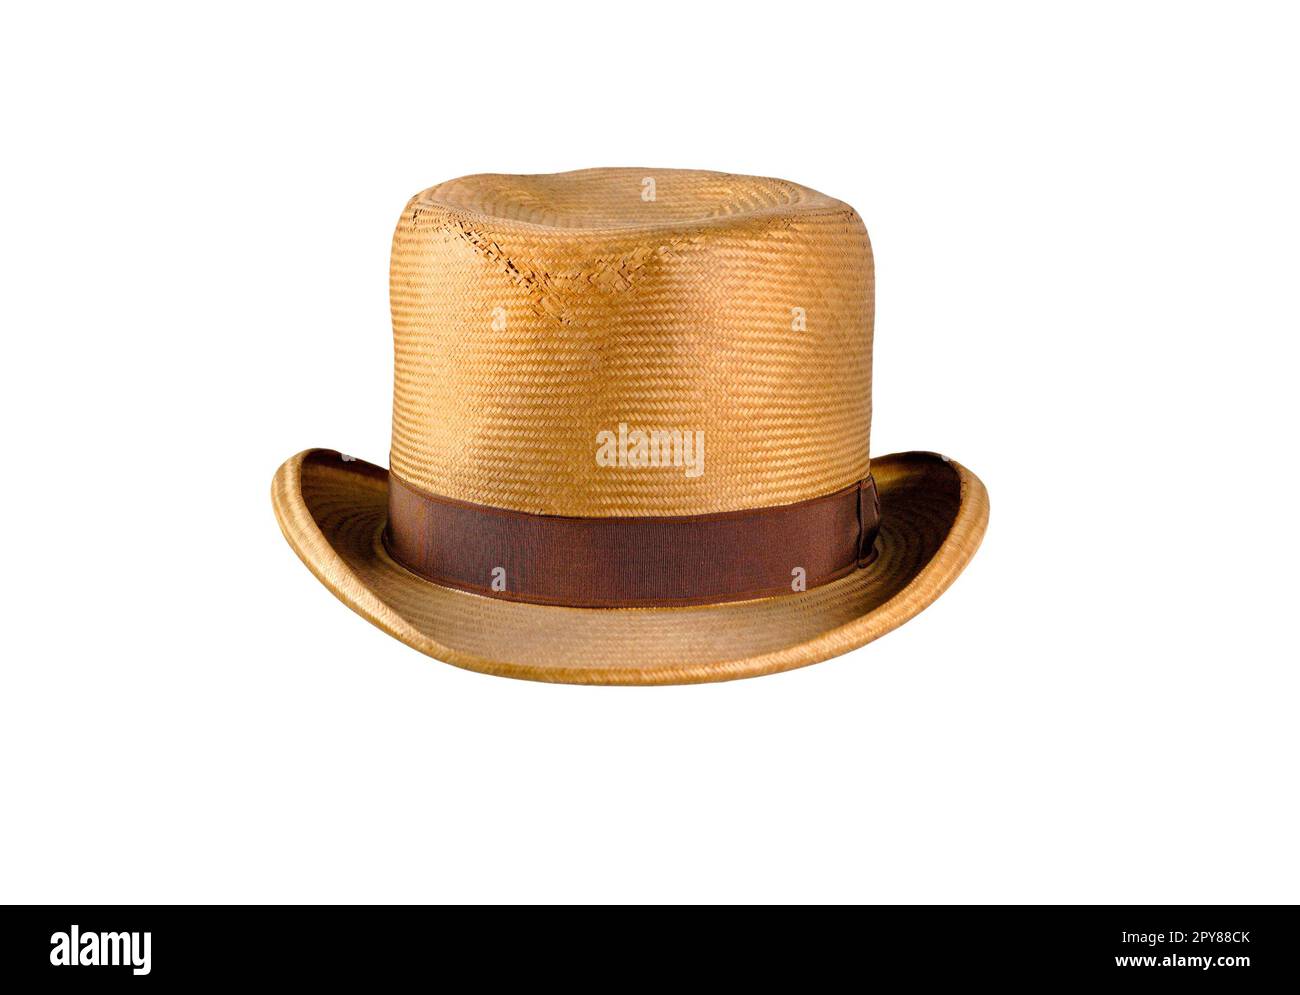 https://c8.alamy.com/comp/2PY88CK/old-straw-men-hat-with-silk-ribbon-isolated-2PY88CK.jpg